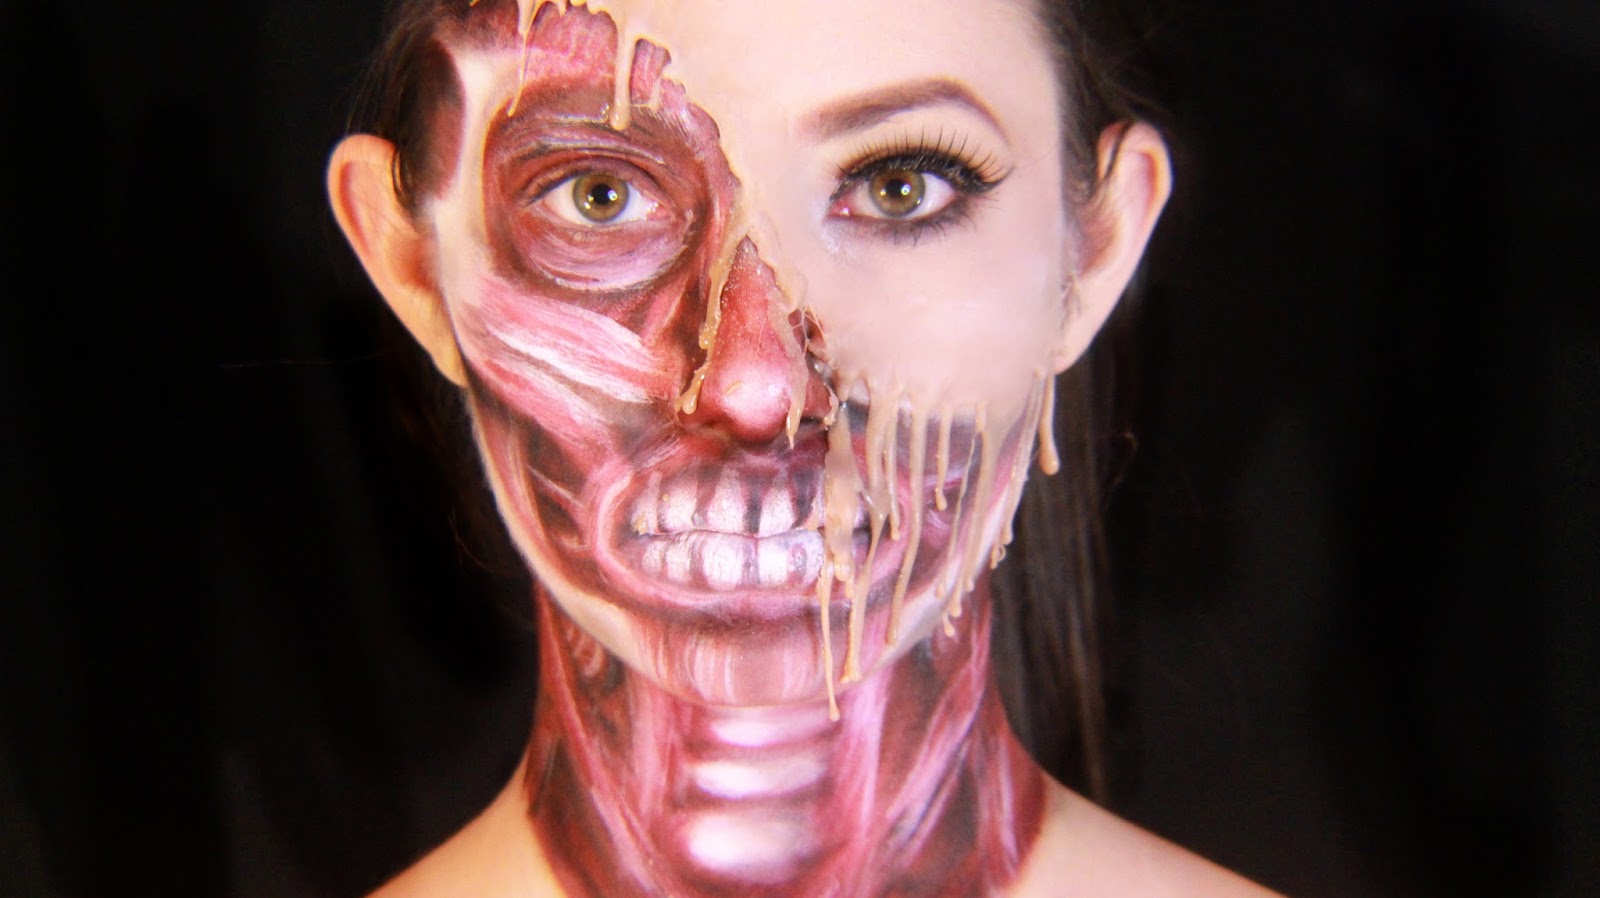 EXPOSED MUSCLES DRIPPING FACE SPECIAL FX MAKEUP TUTORIAL Kosmic